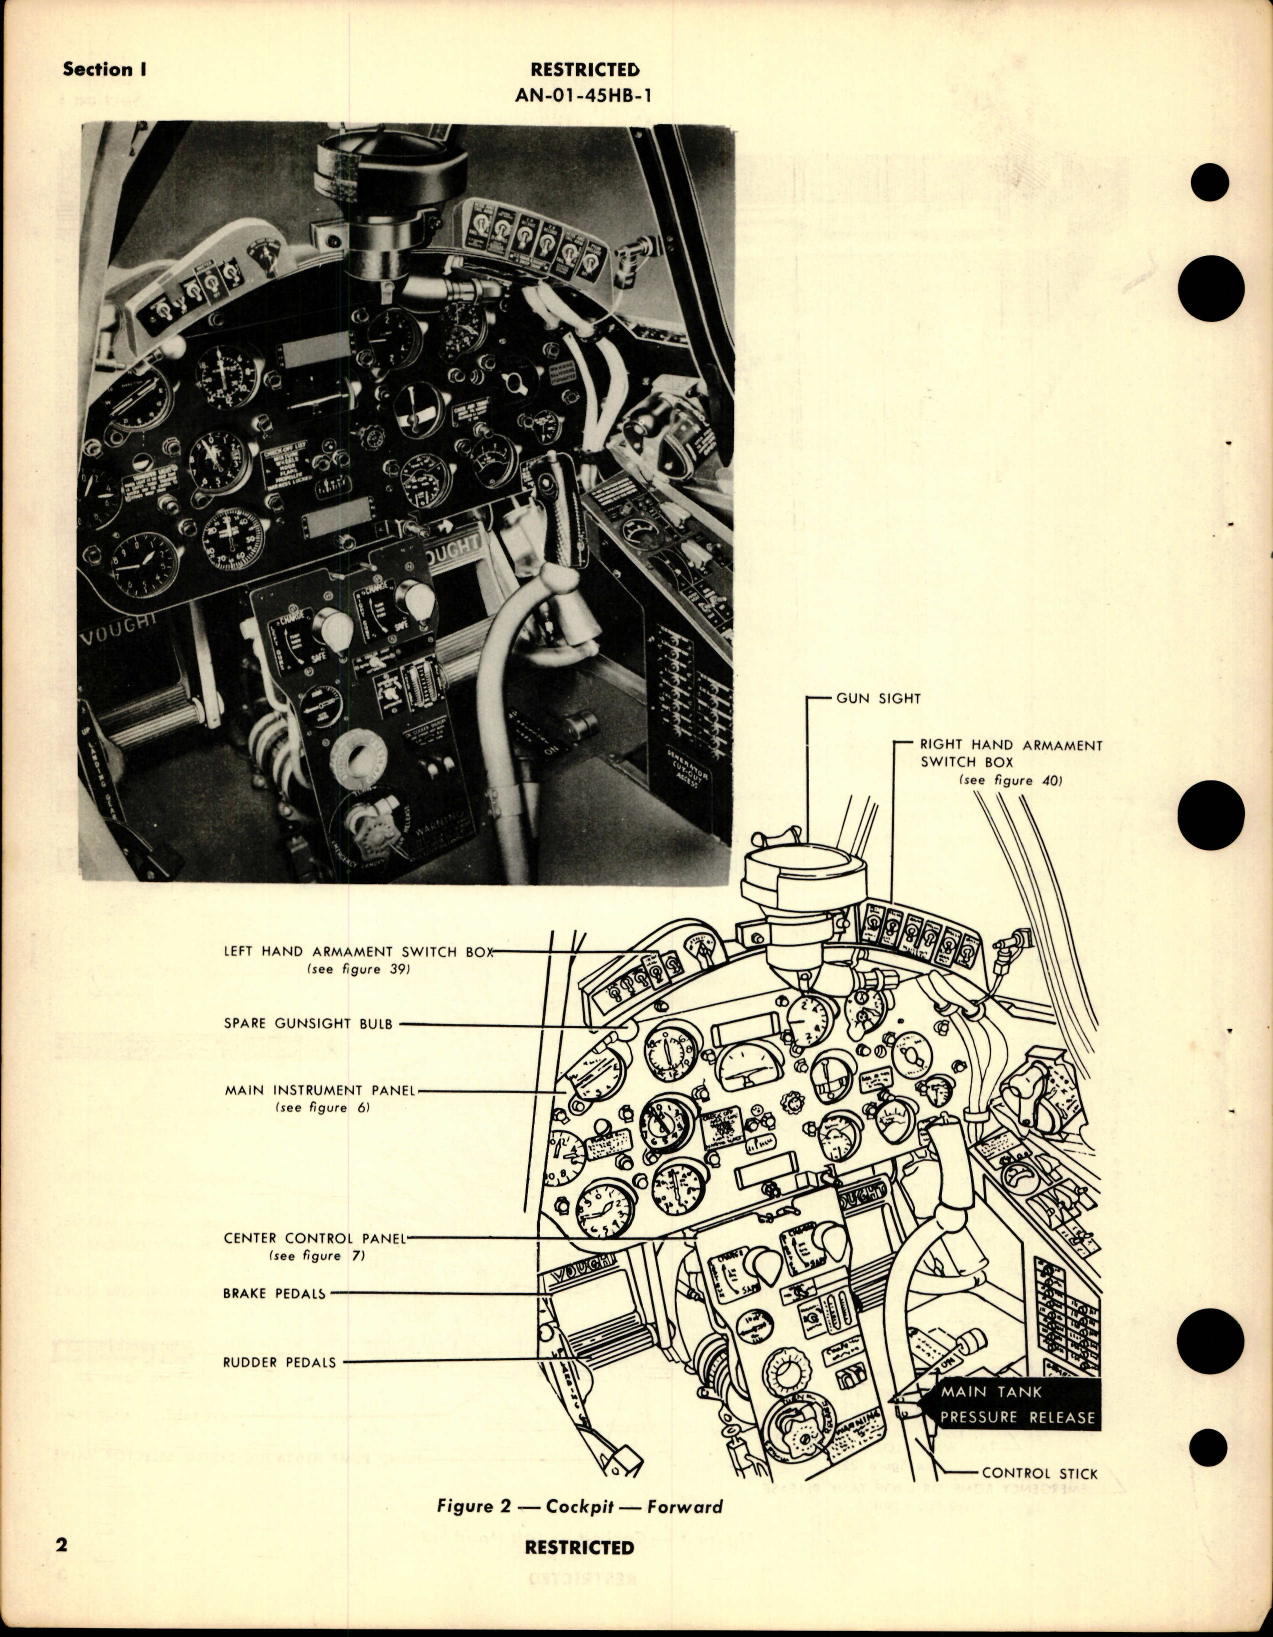 Sample page 8 from AirCorps Library document: Pilot's Handbook for F4U-4, F4U-4B